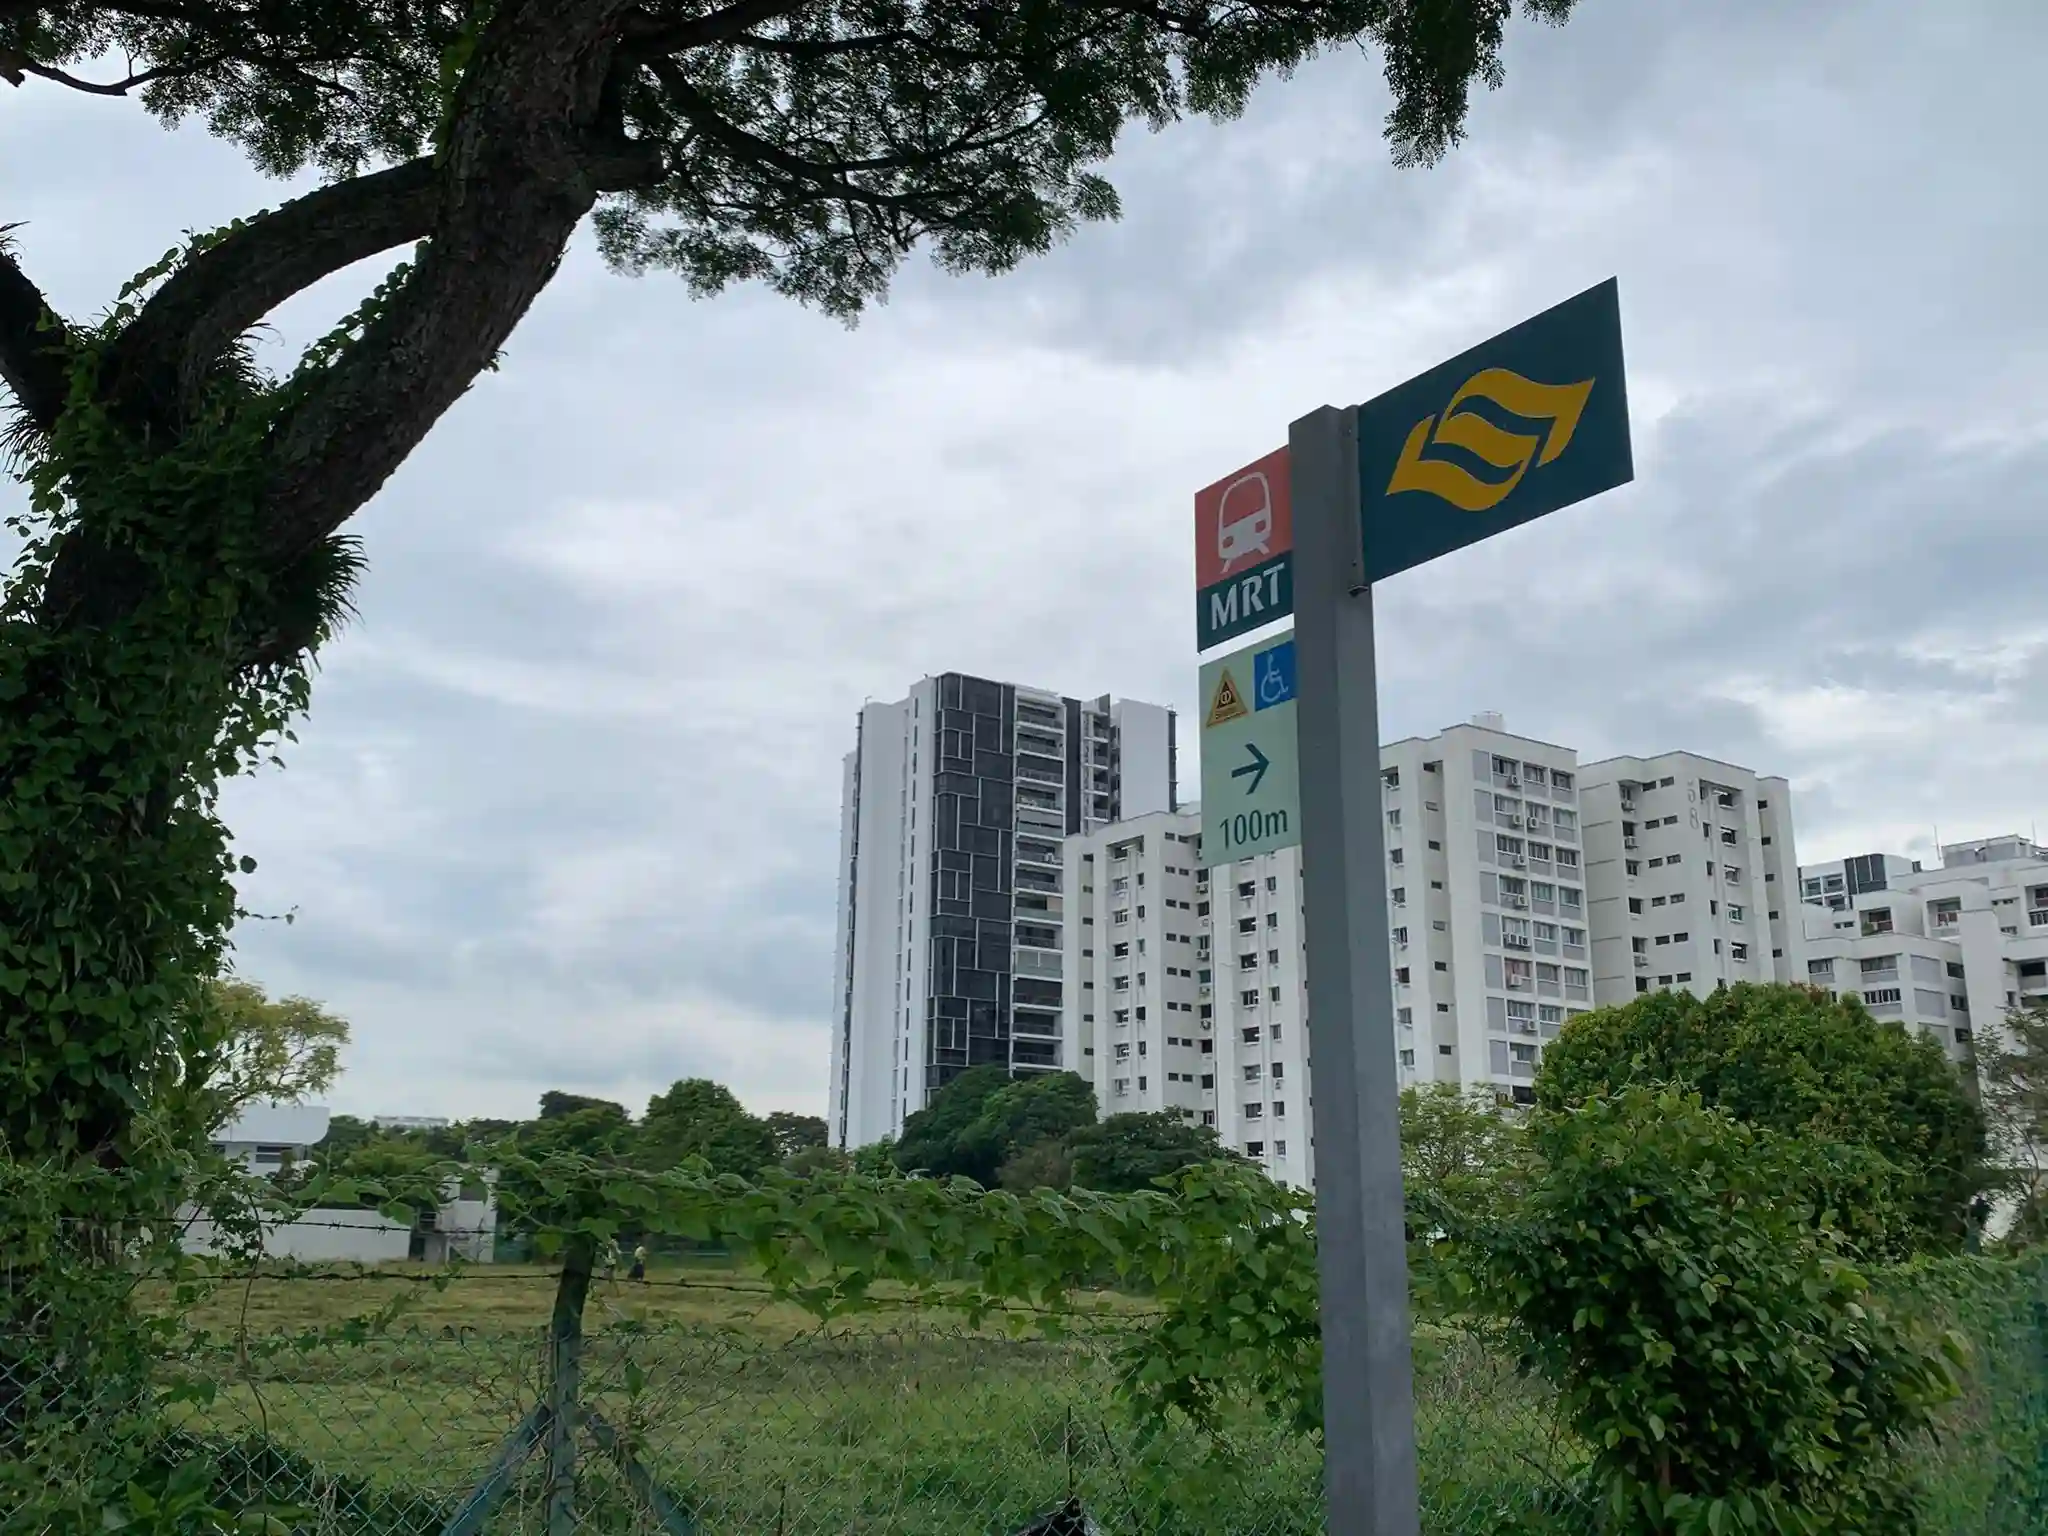 Grand Dunman is approximately 100meters to Dakota MRT. You will take 1-2minutes to reach the MRT Station